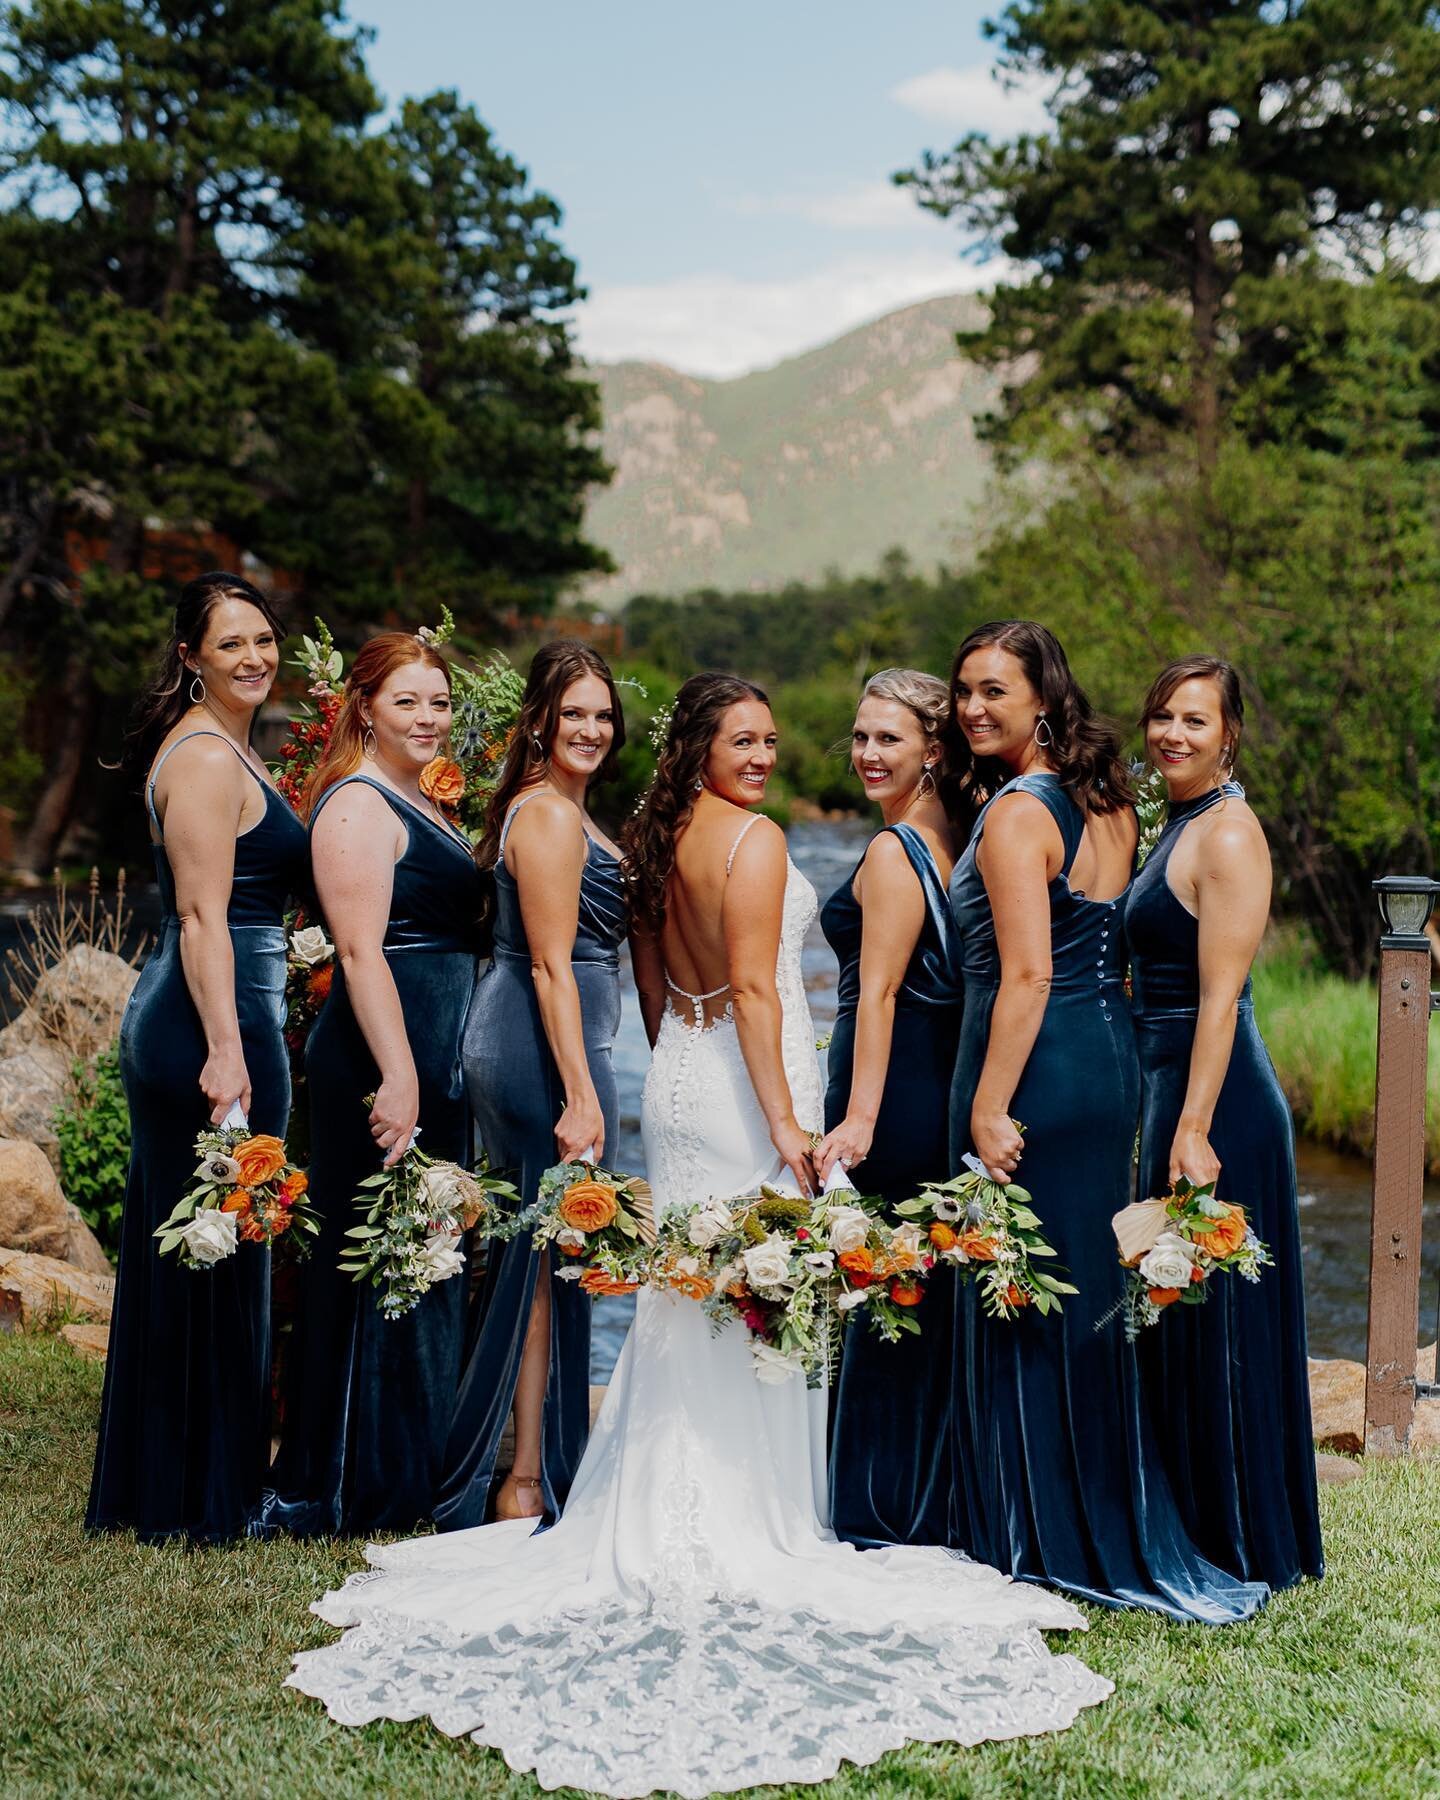 #RockyMountainBride #SquadGoals ! Molly &amp; her crew soaked in the beautiful Estes sunshine on their perfect day! 📸@sweetjusticephoto 💋GlamSquad @devine_designs_by_devin @chauntastic @thricecreated